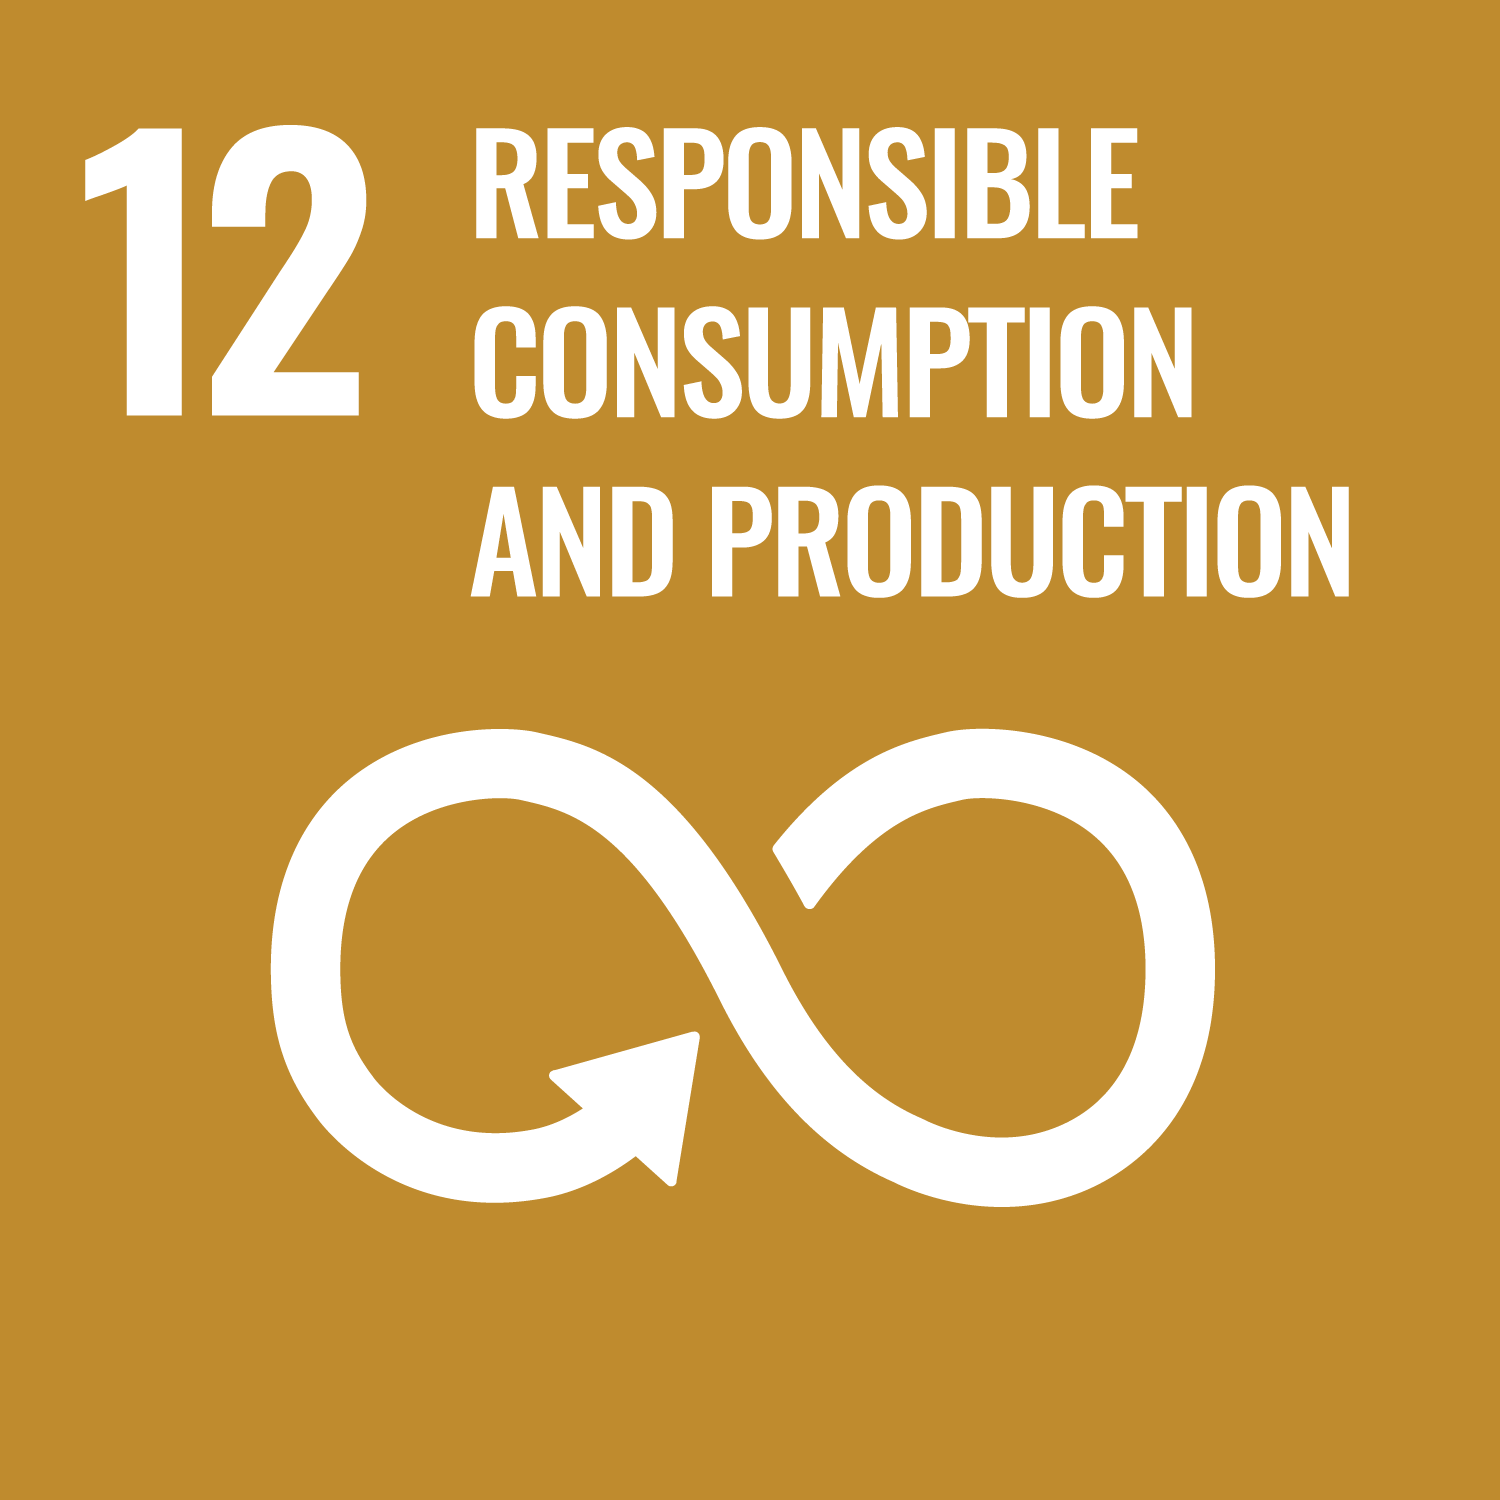 Target 12．Responsible consumption and production